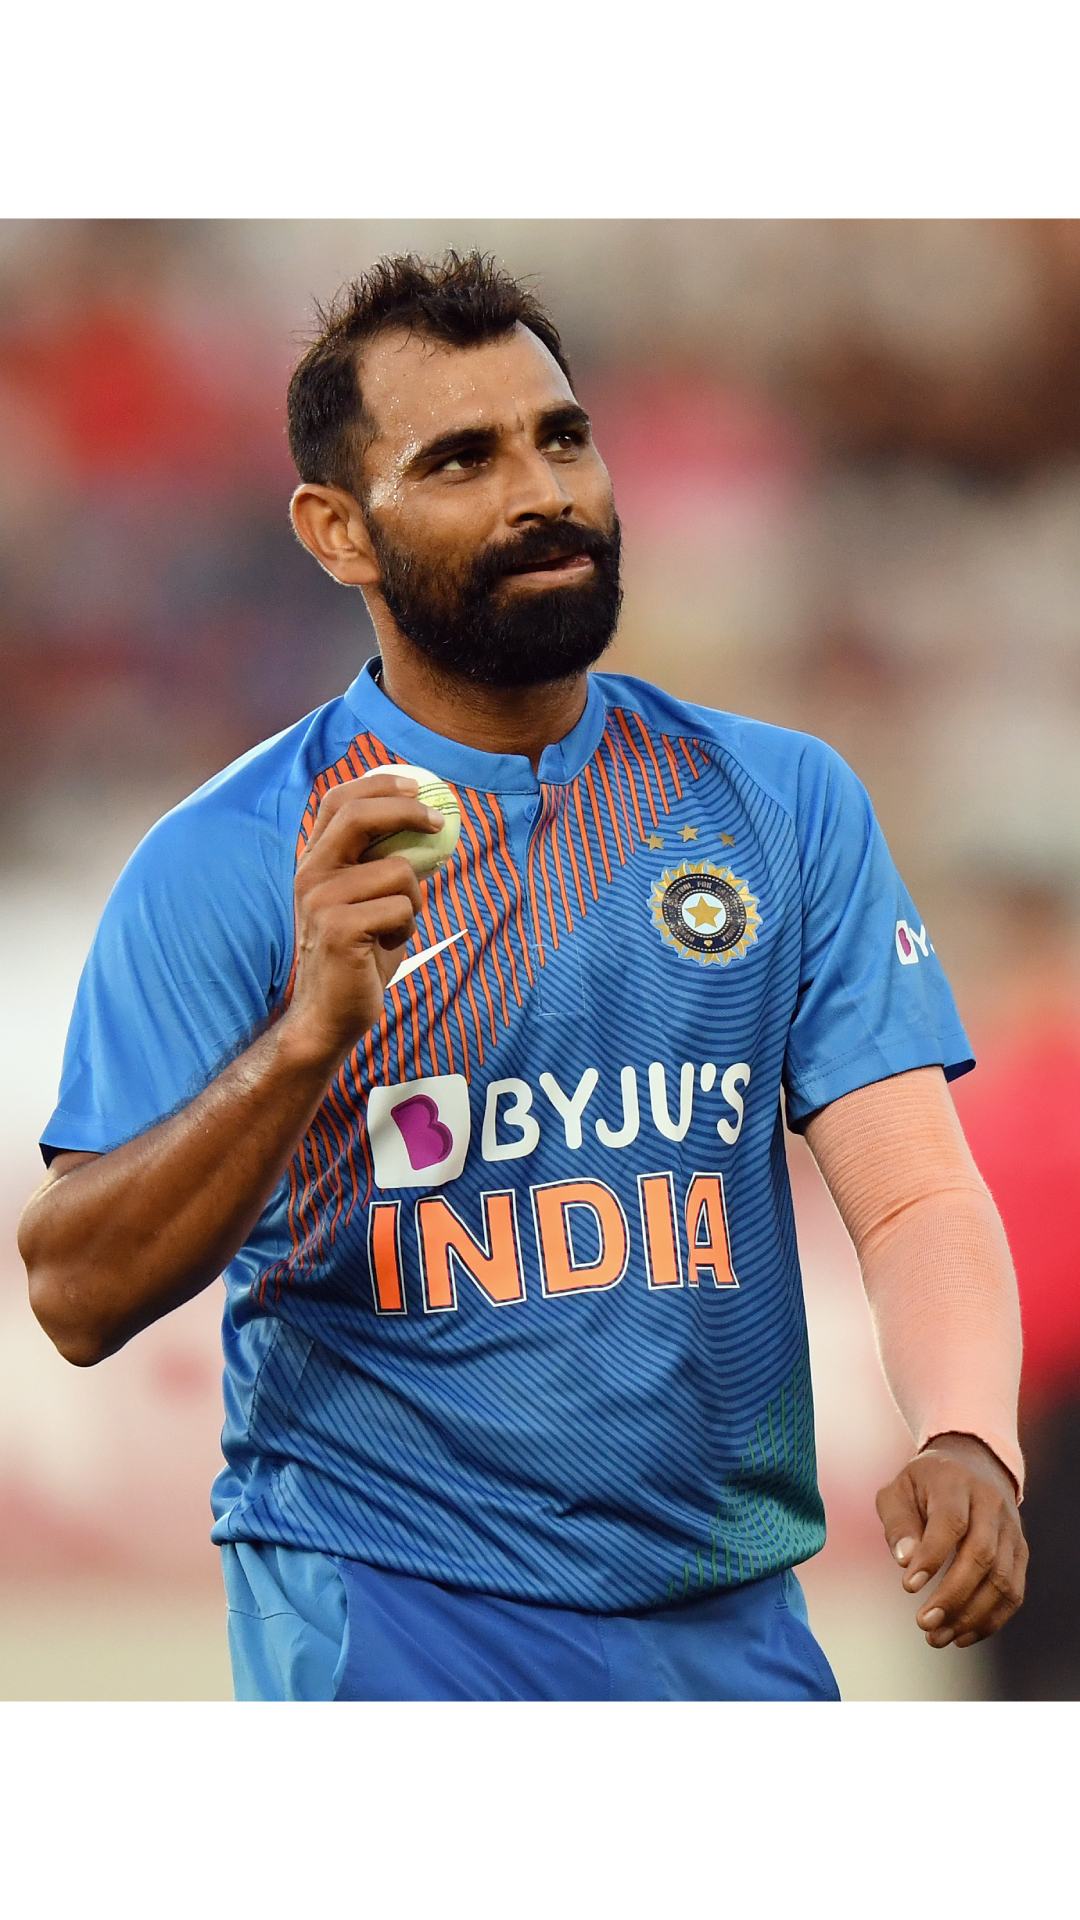 Mohammed Shami's performance against Pakistan in all formats of cricket